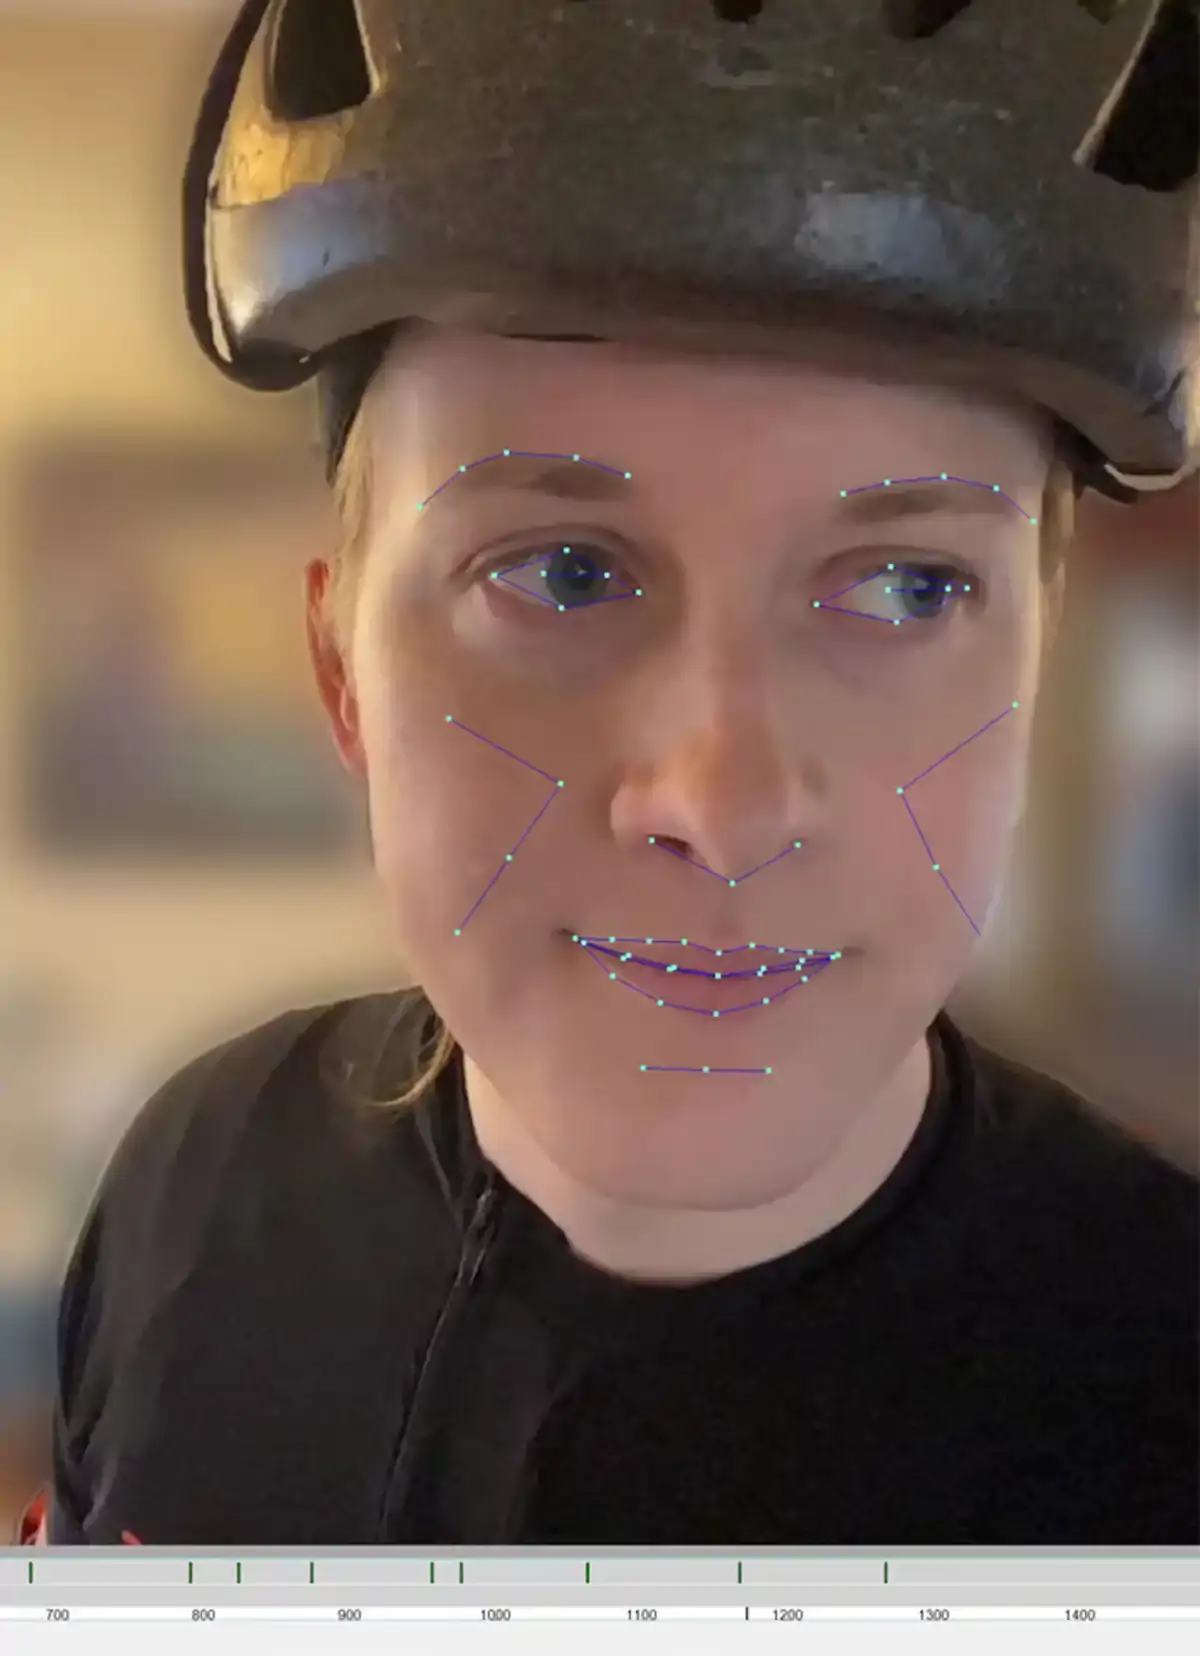 Palfanier wears a helmet with mocap data lines and nodes overlaid onto her facial features.